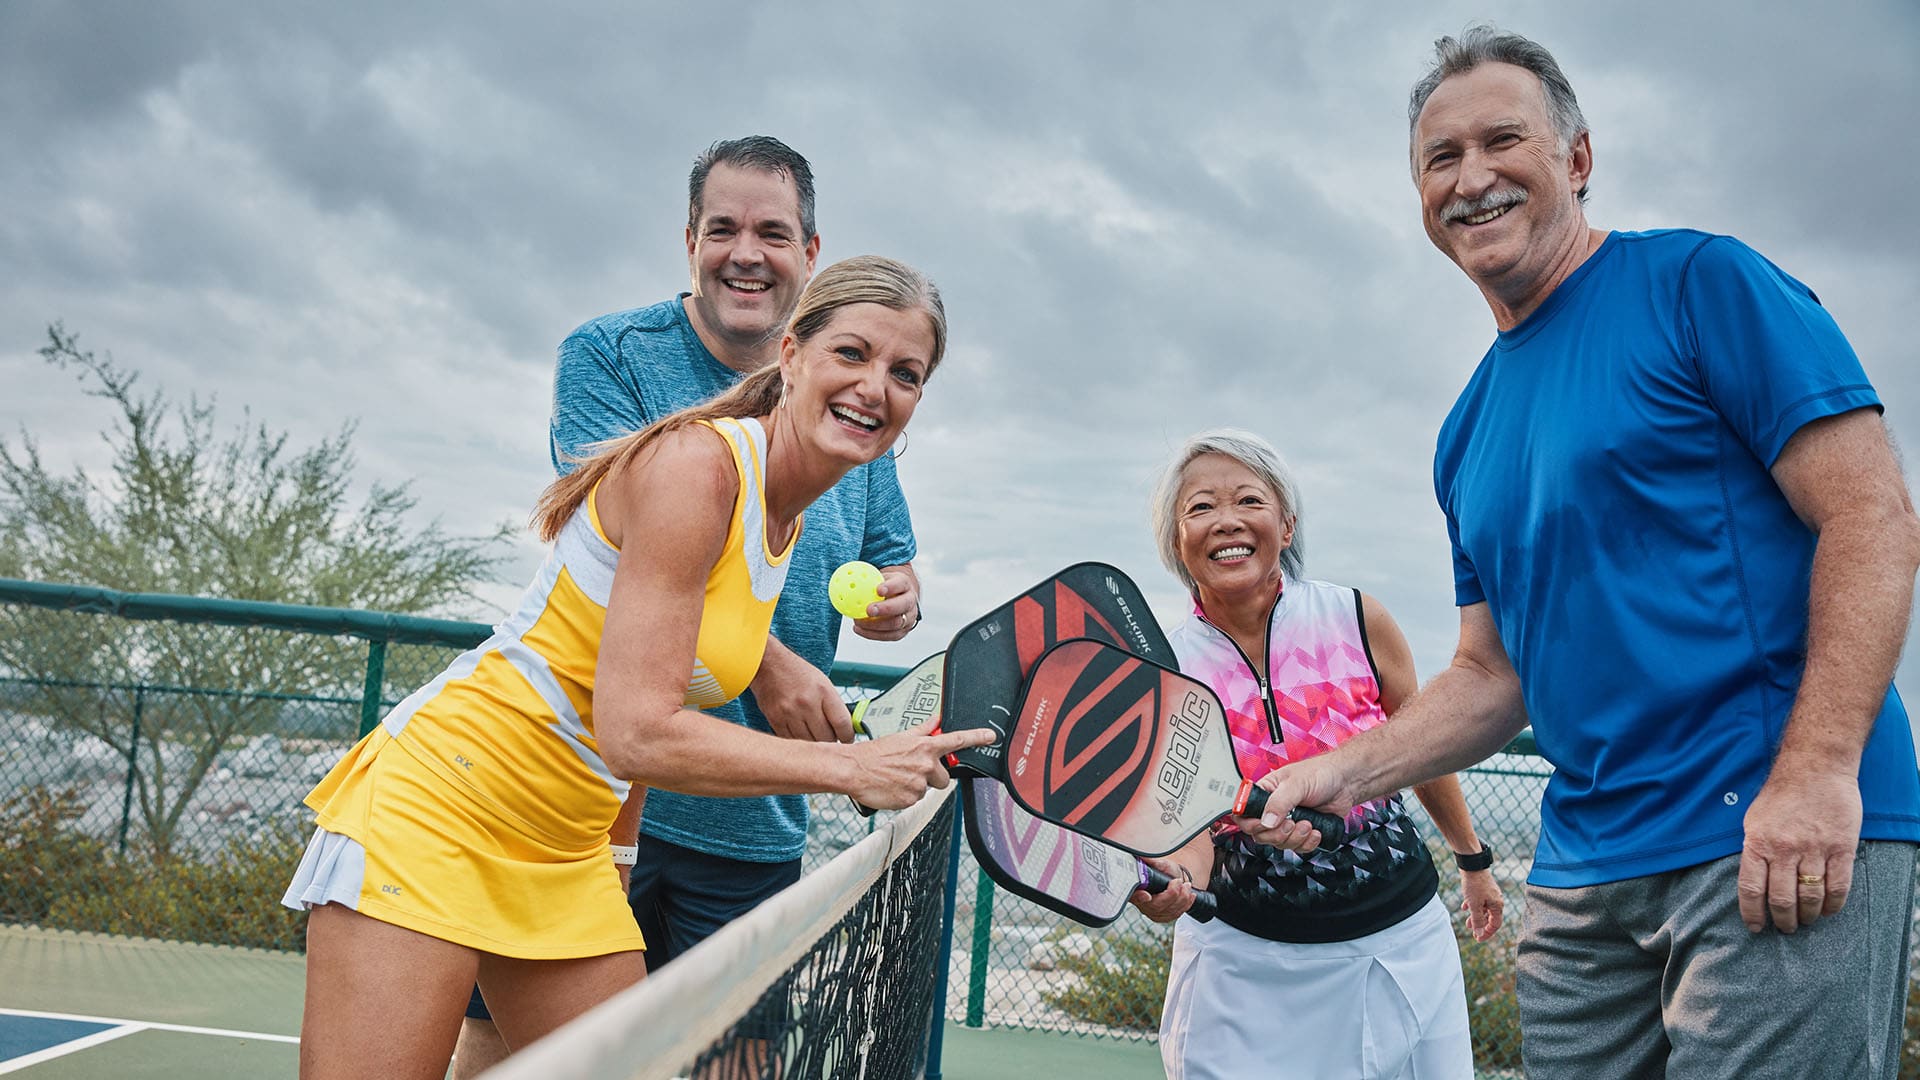 Two couples pose for a photo on a tennis court.